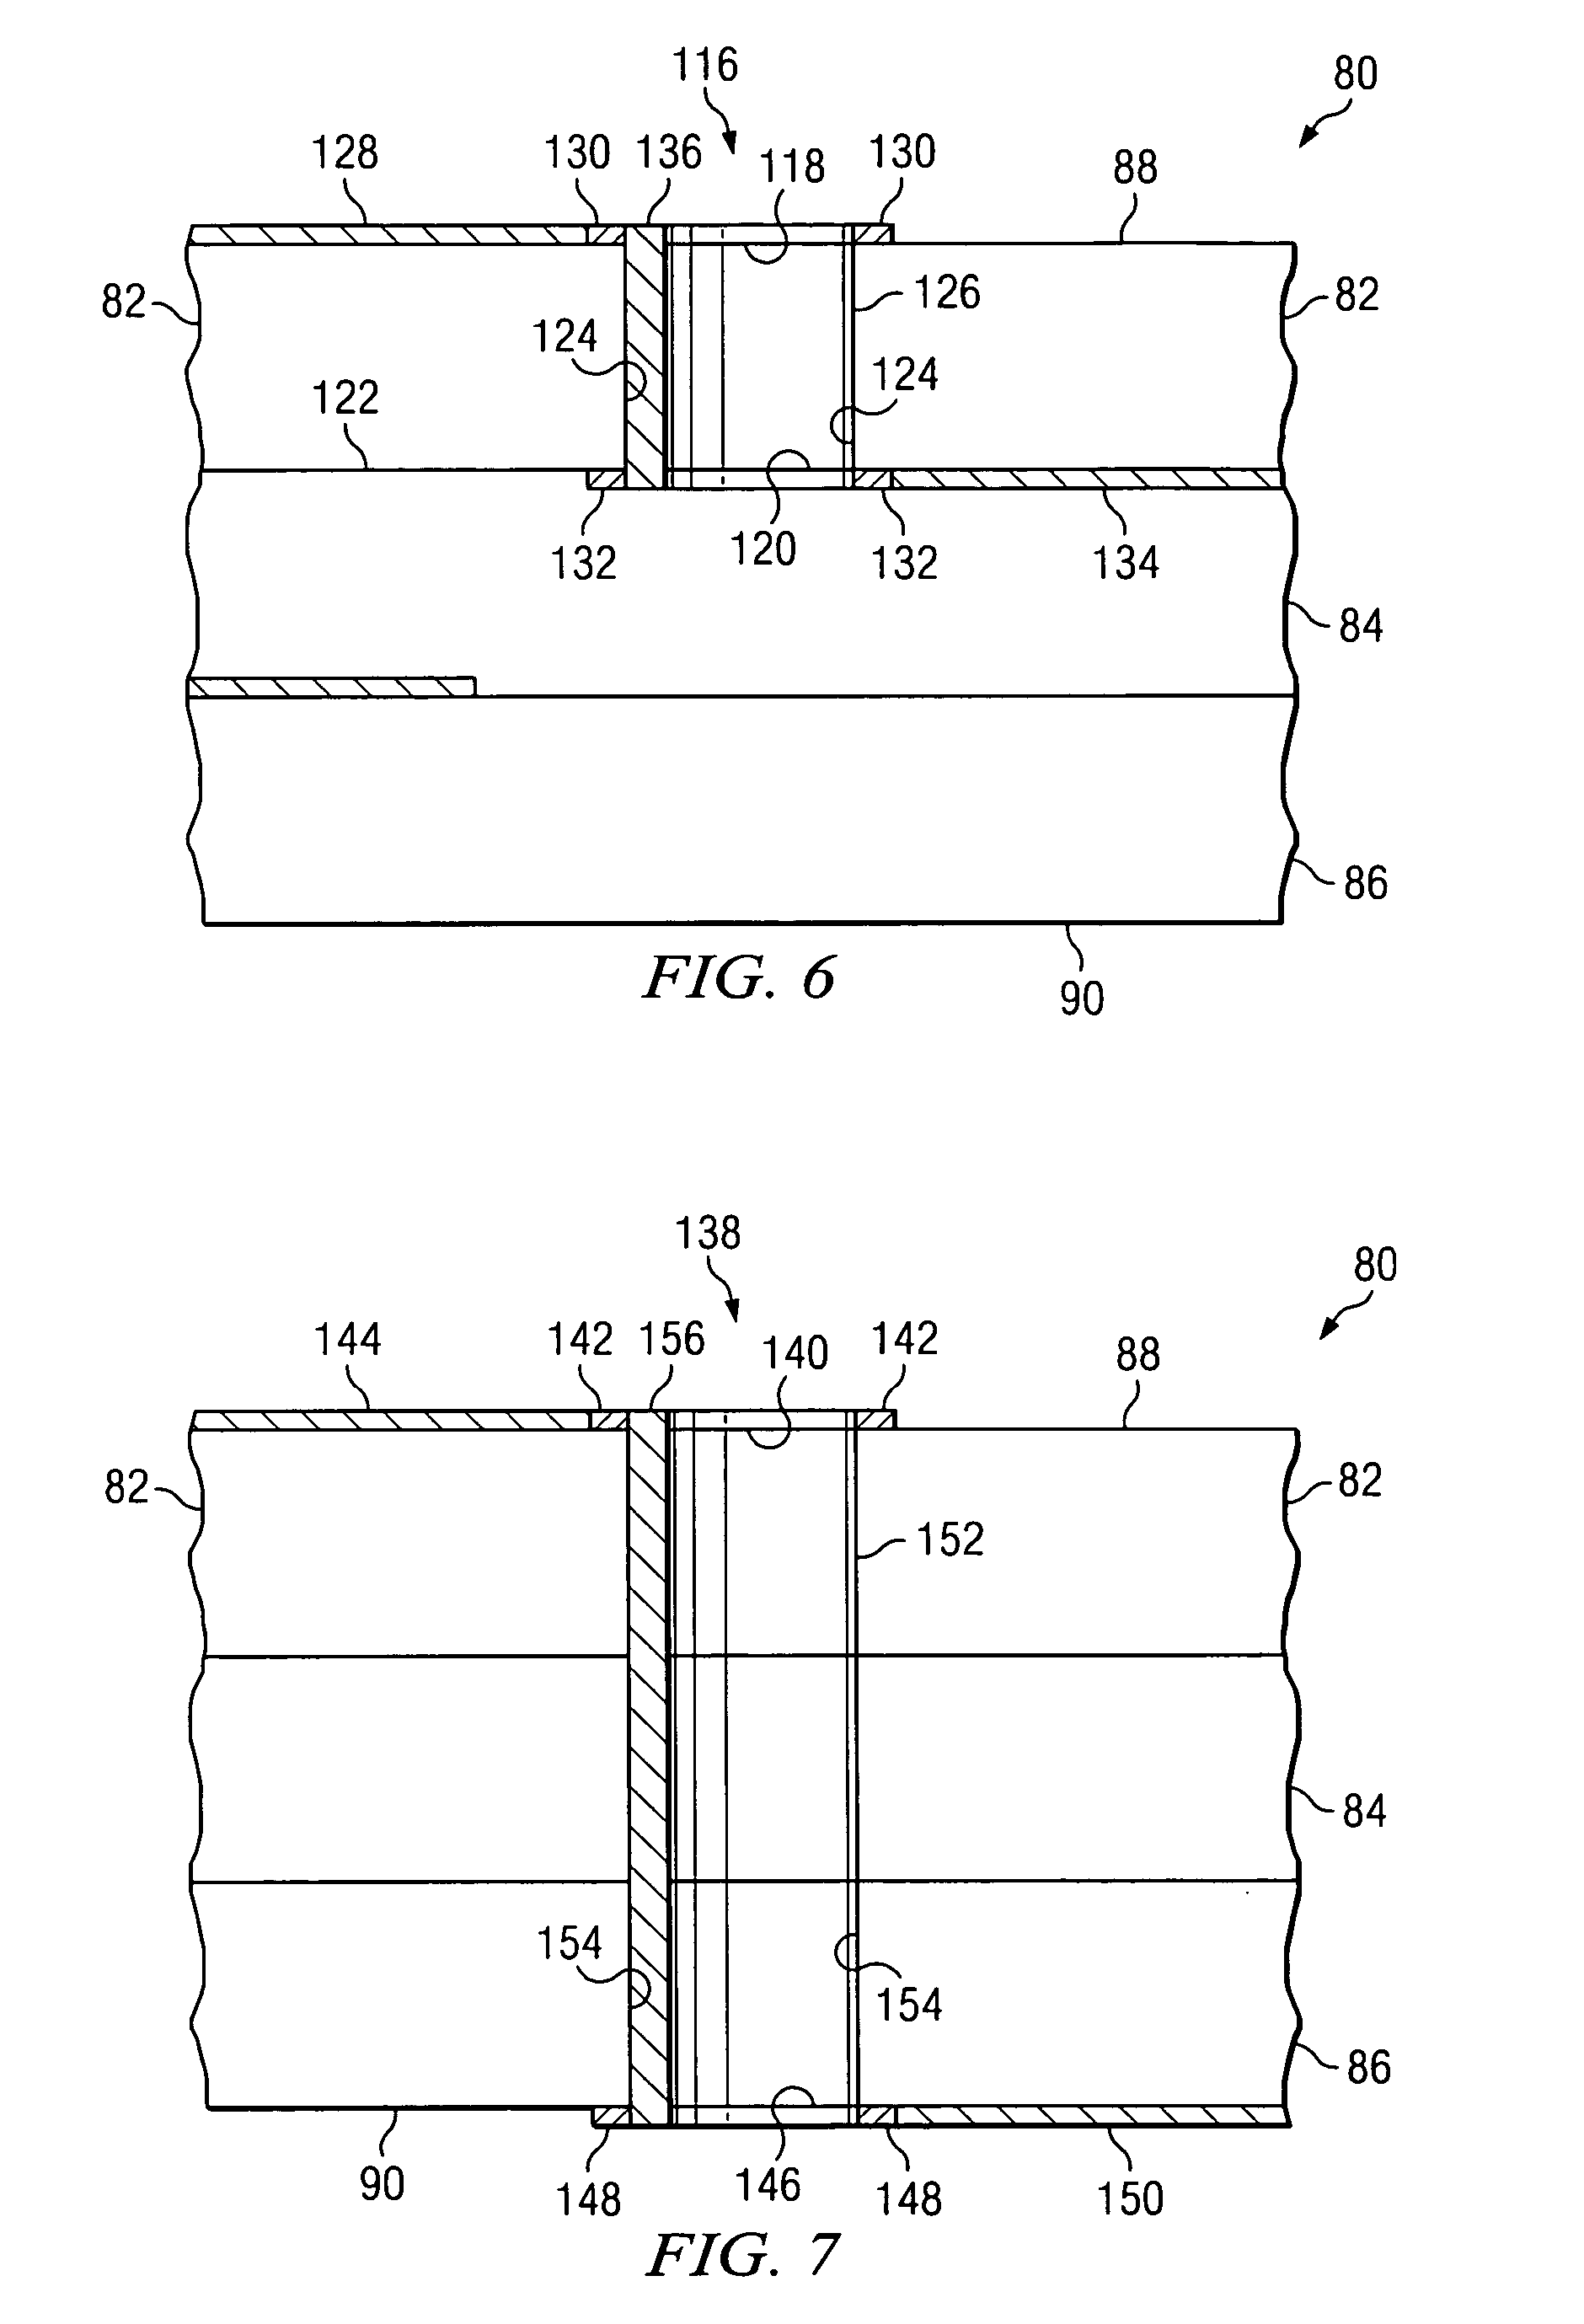 Method, system and apparatus for controlled impedance at transitional plated-through hole via sites using barrel inductance minimization